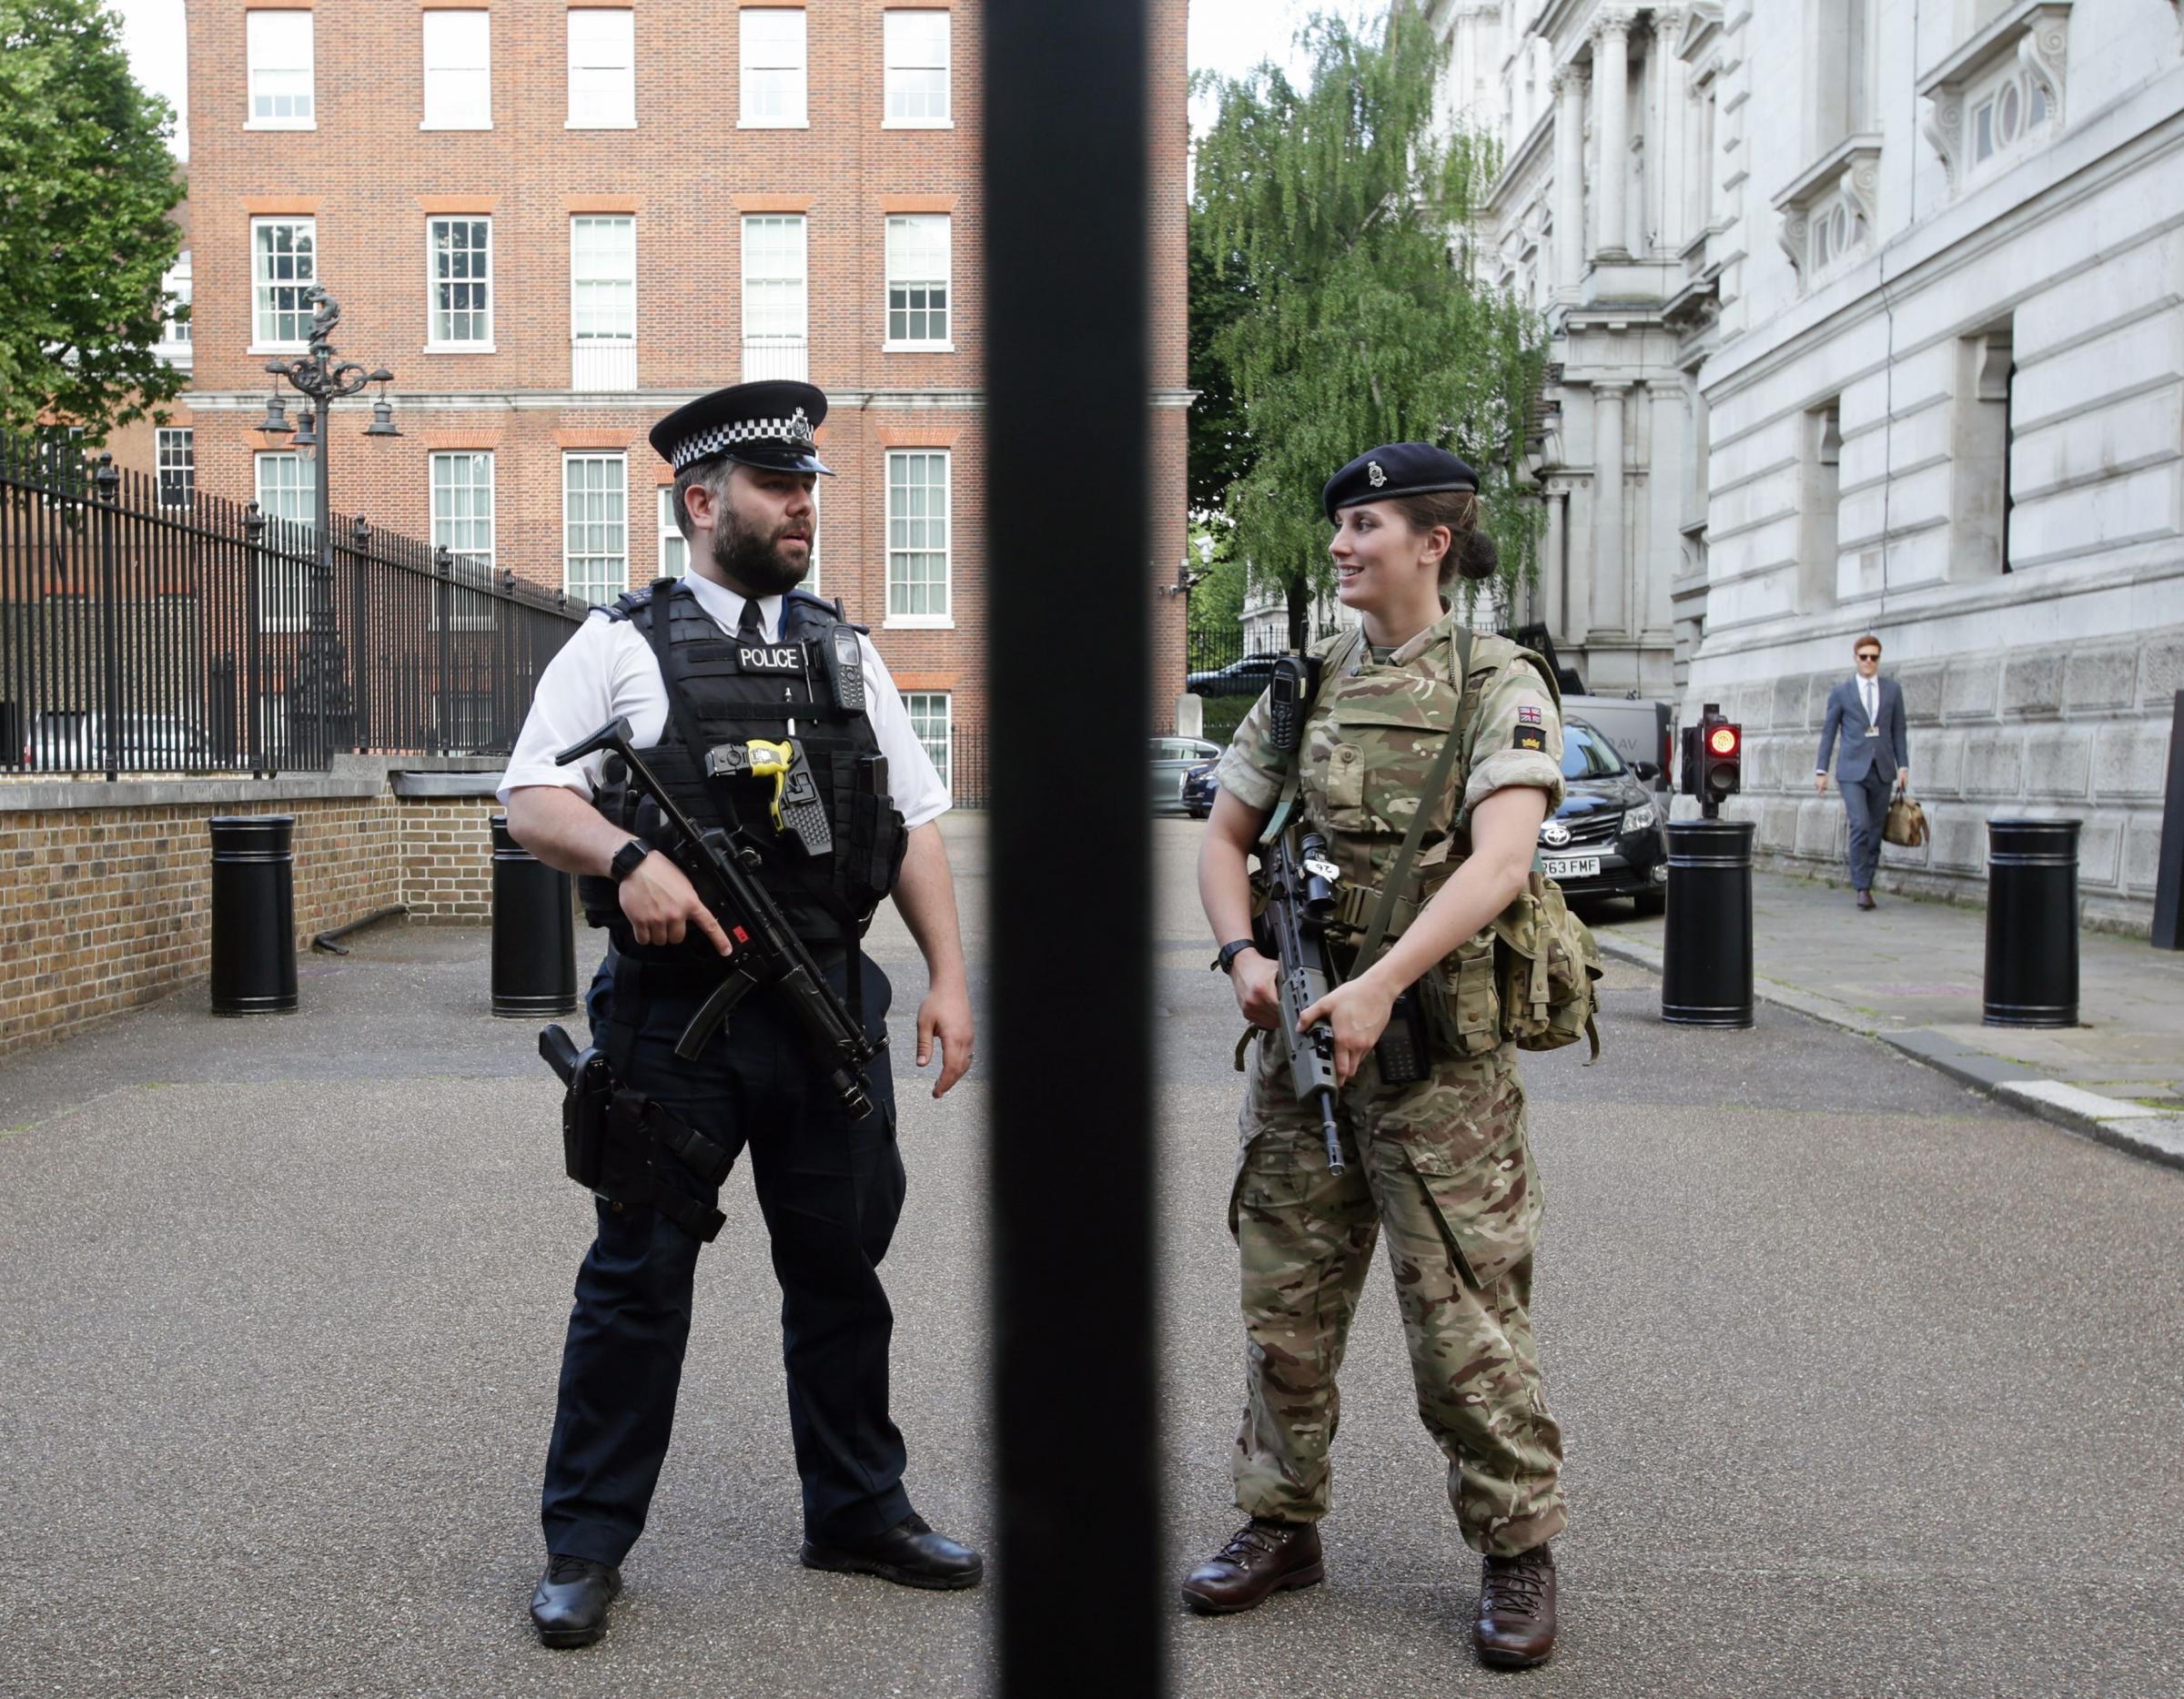 Armed forces deployed in London in response to critical terror alert